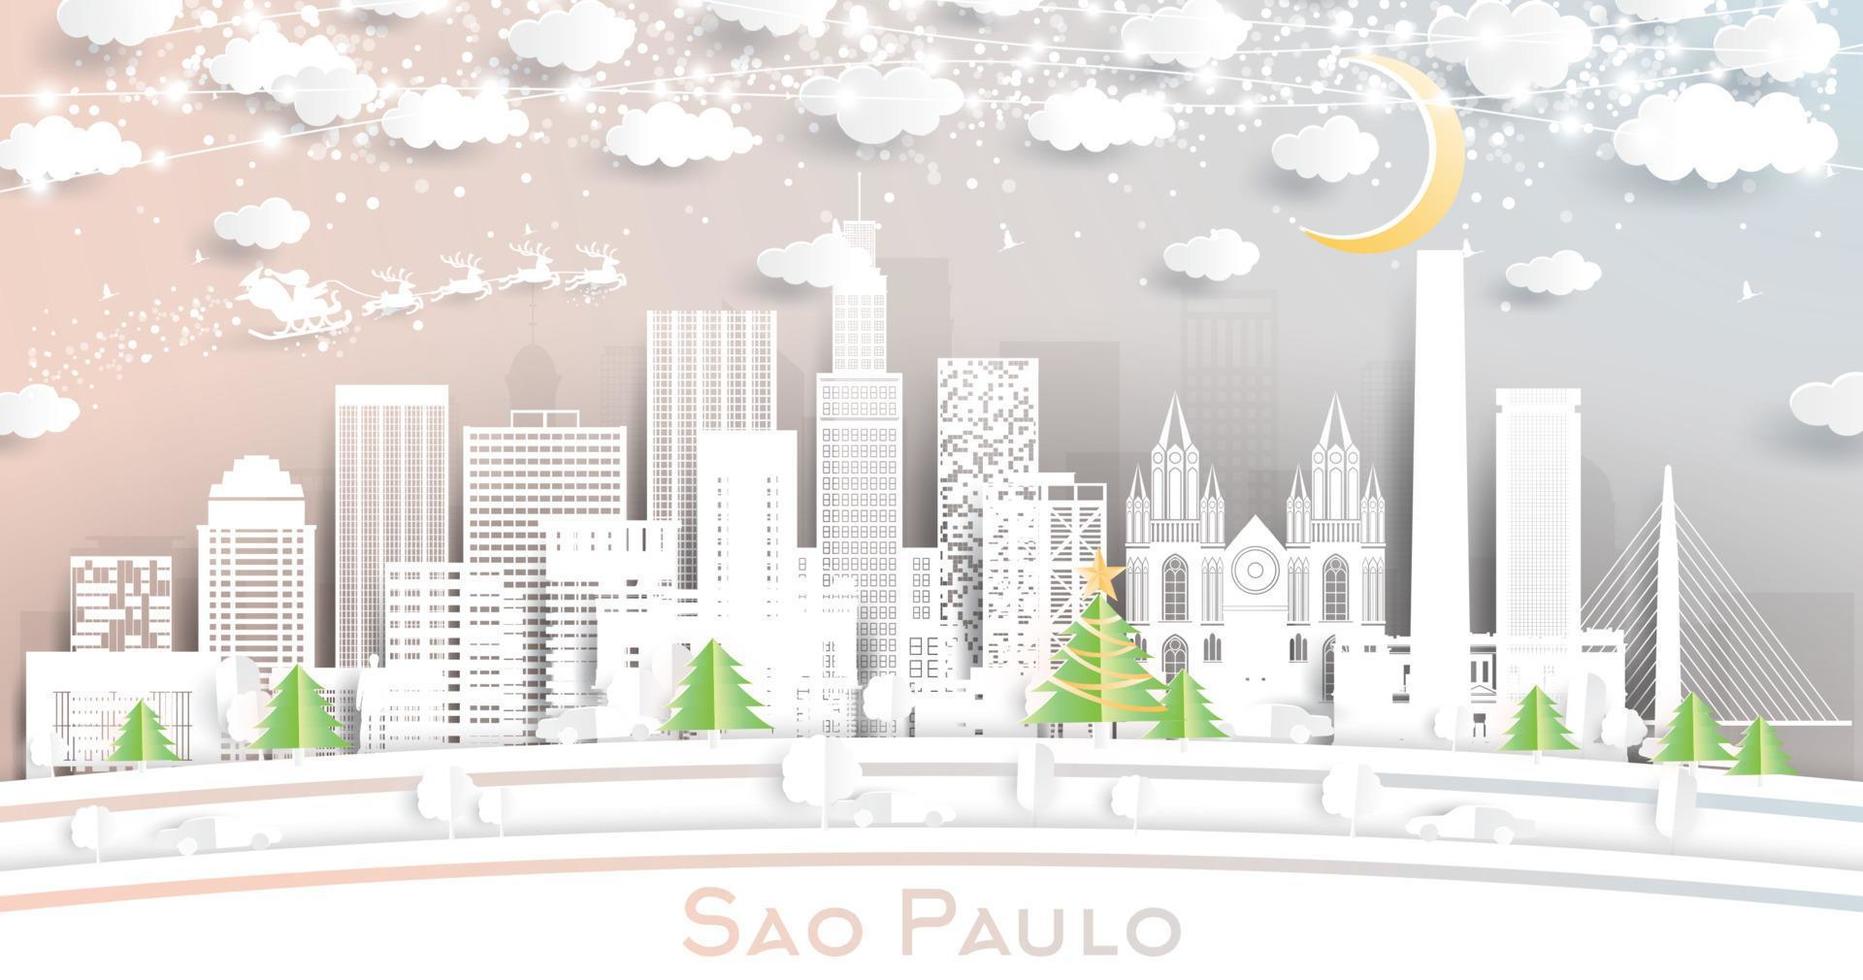 Sao Paulo Brazil City Skyline in Paper Cut Style with Snowflakes, Moon and Neon Garland. vector